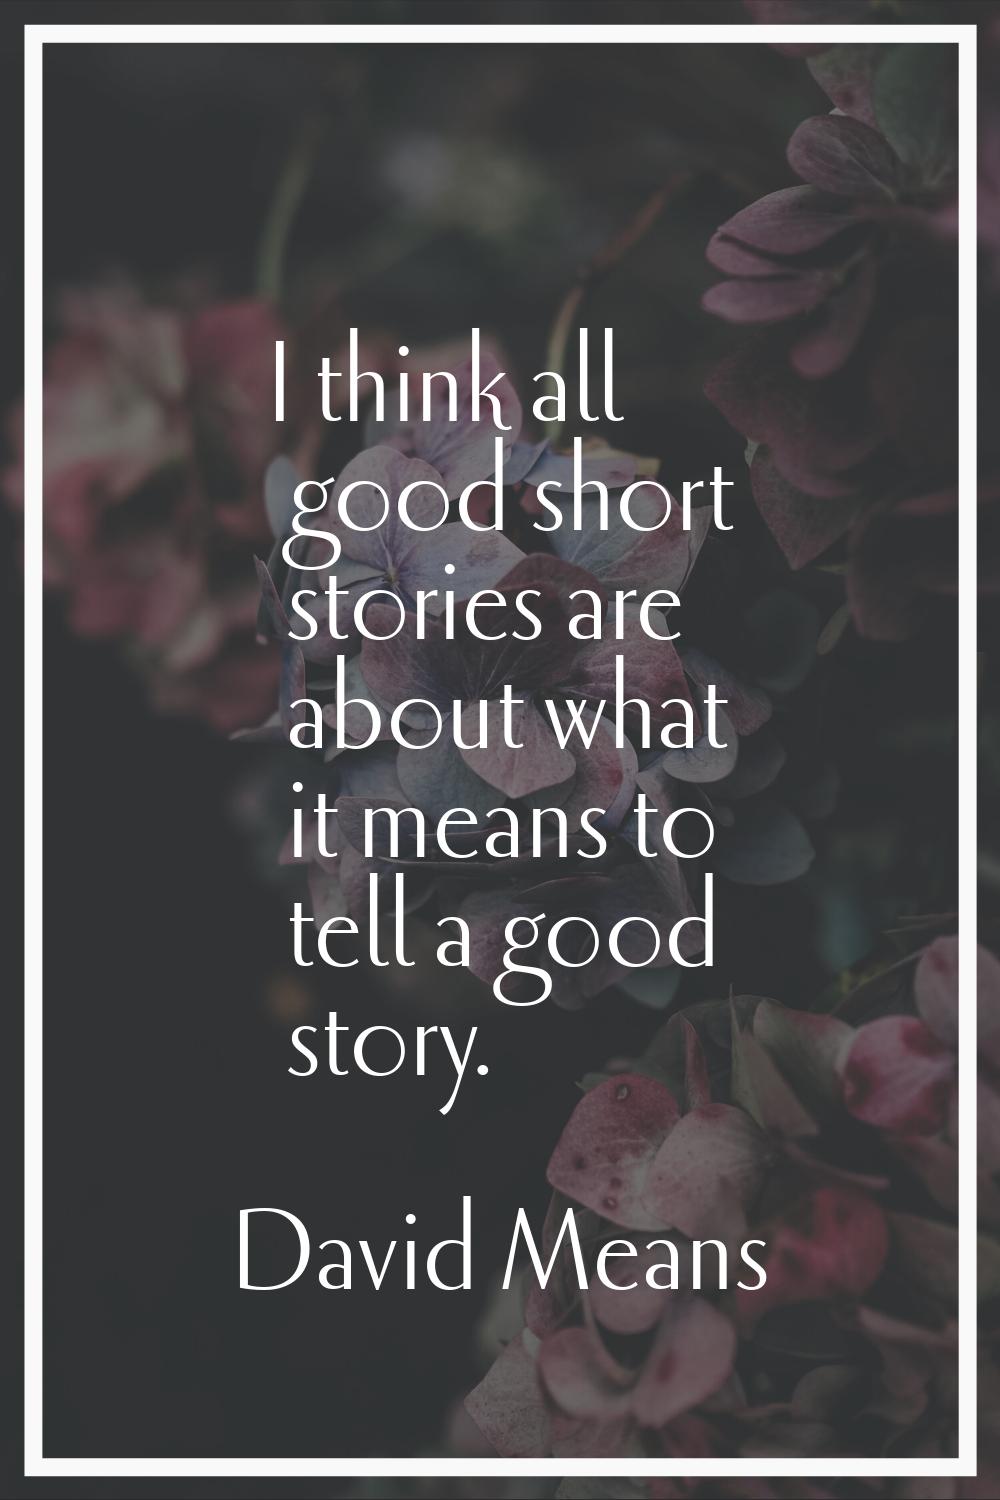 I think all good short stories are about what it means to tell a good story.